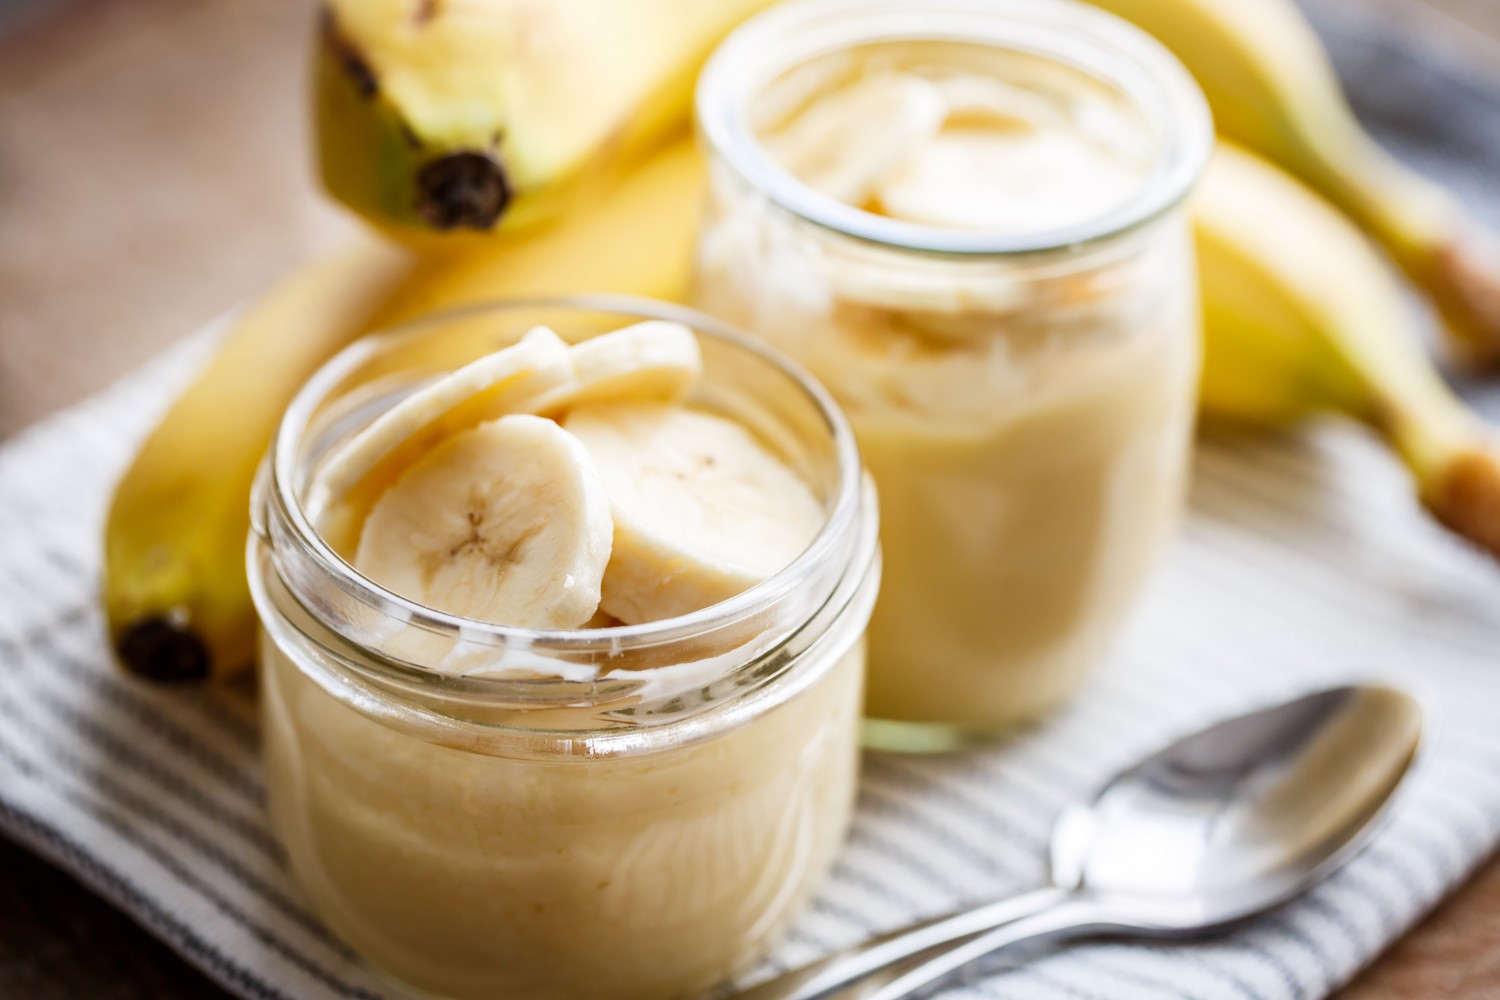 How To Store Banana Pudding